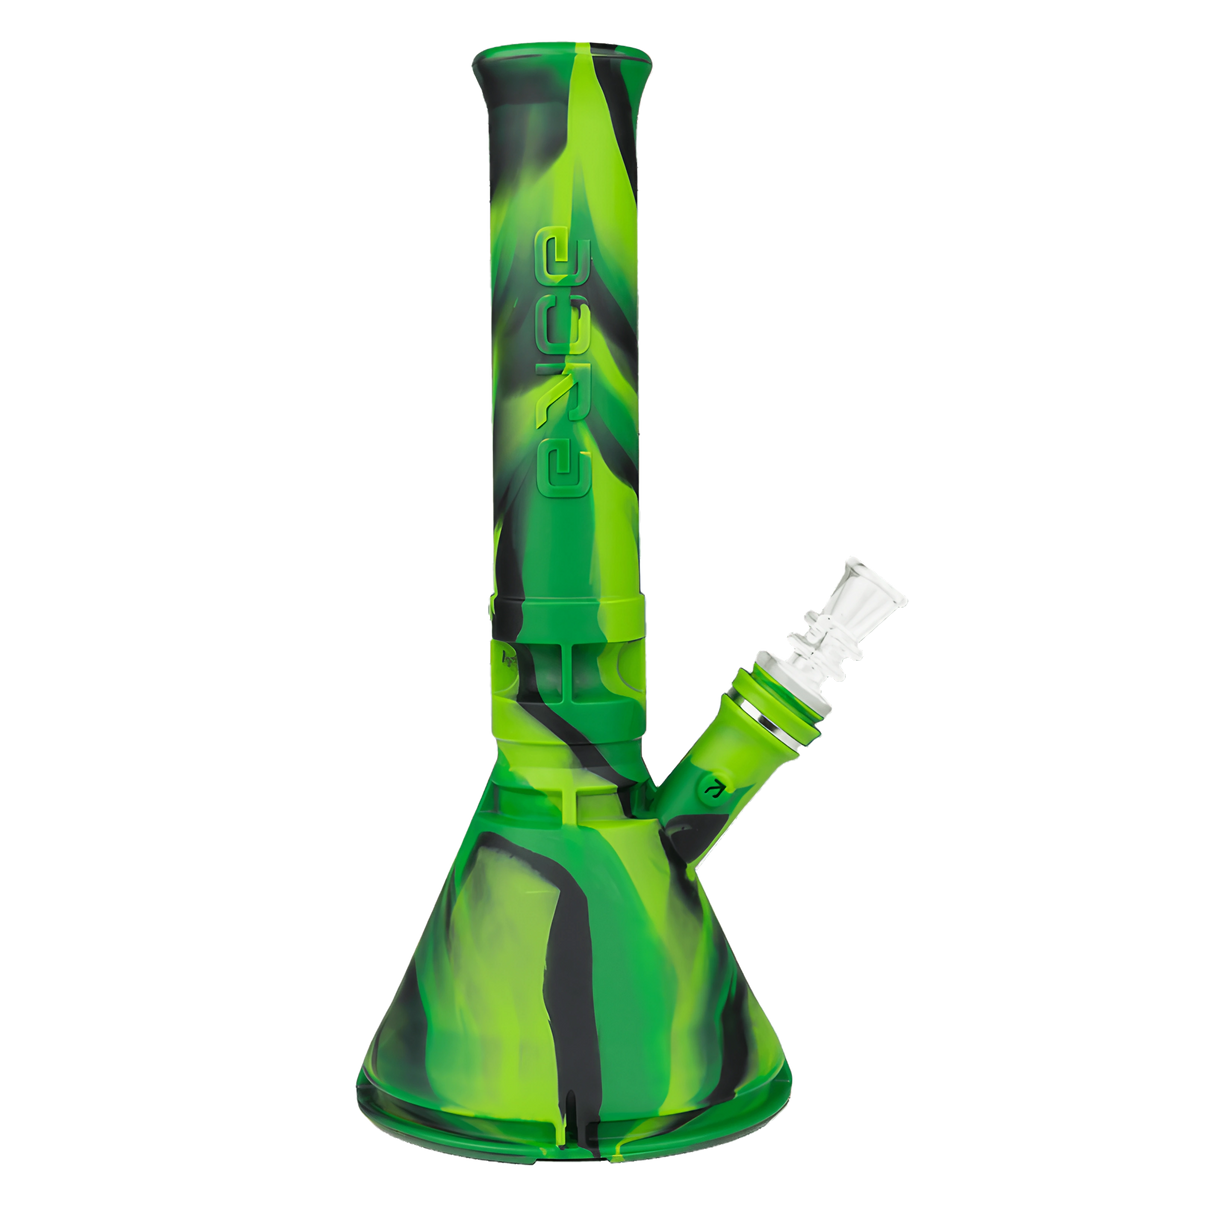 Eyce Beaker Bong in green silicone with large bowl, front view on a white background